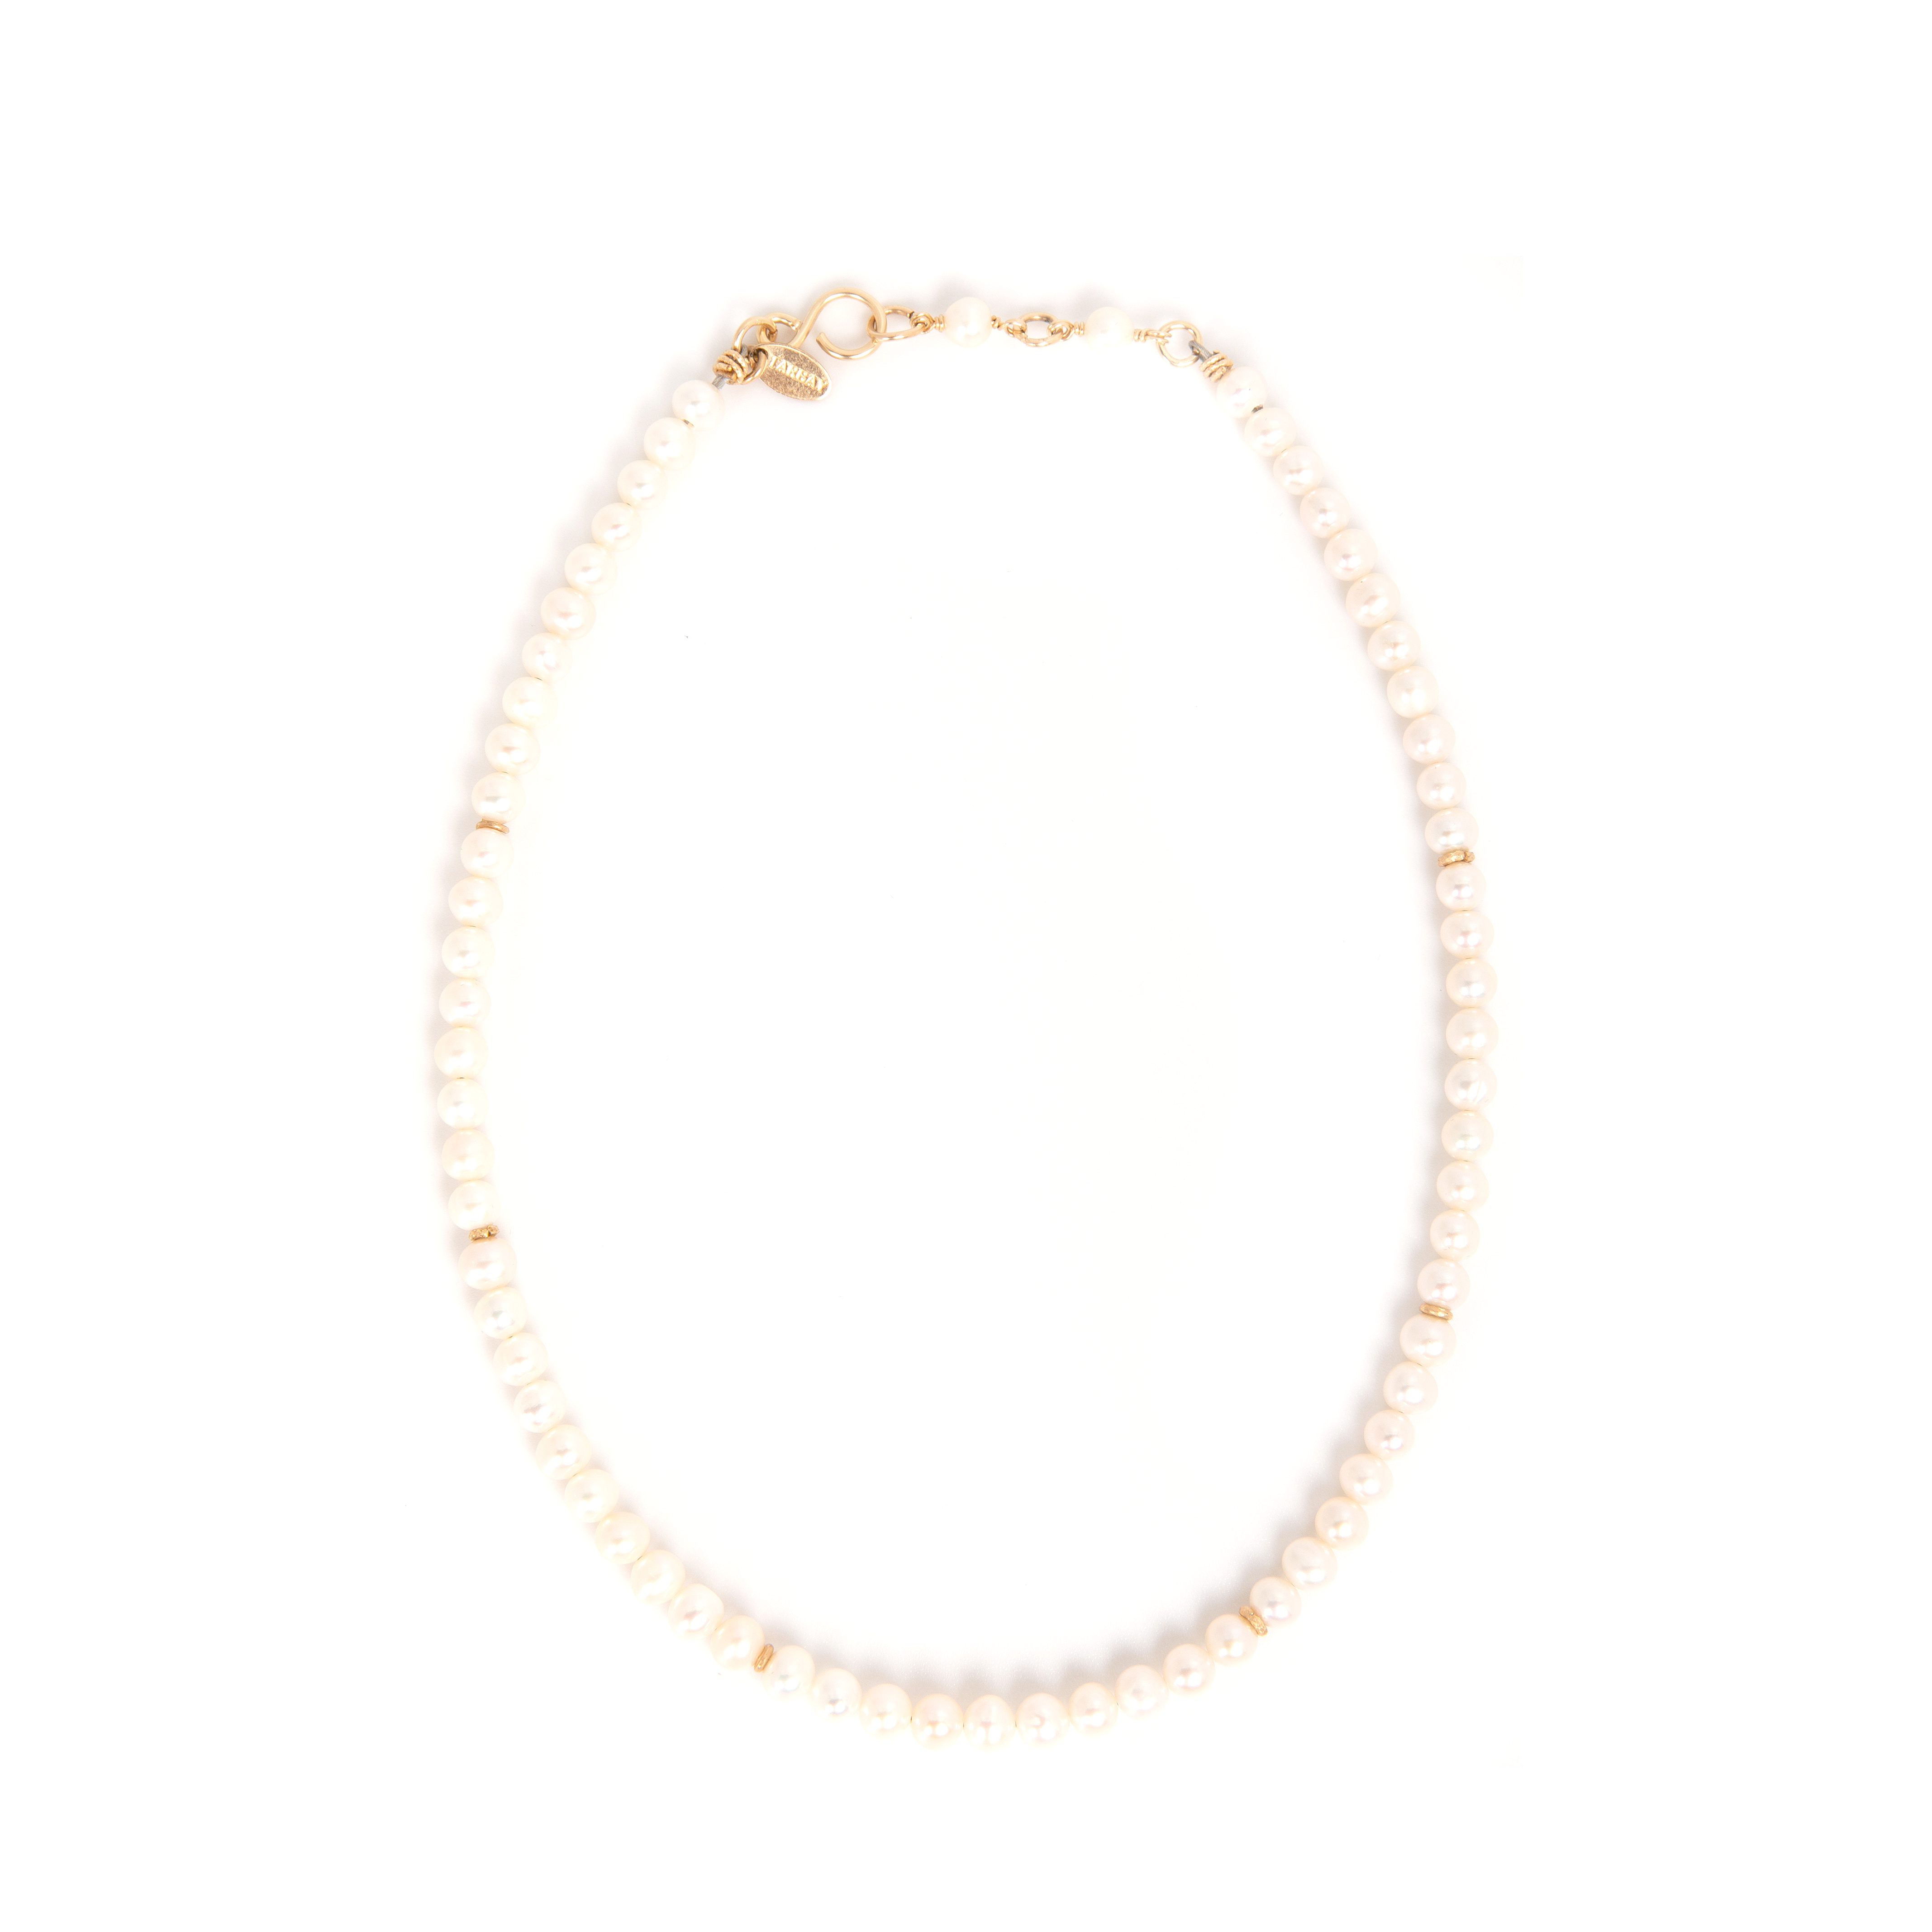 Pearl Necklace #2 (6mm) - White Pearl & Yellow Gold Necklaces TARBAY   